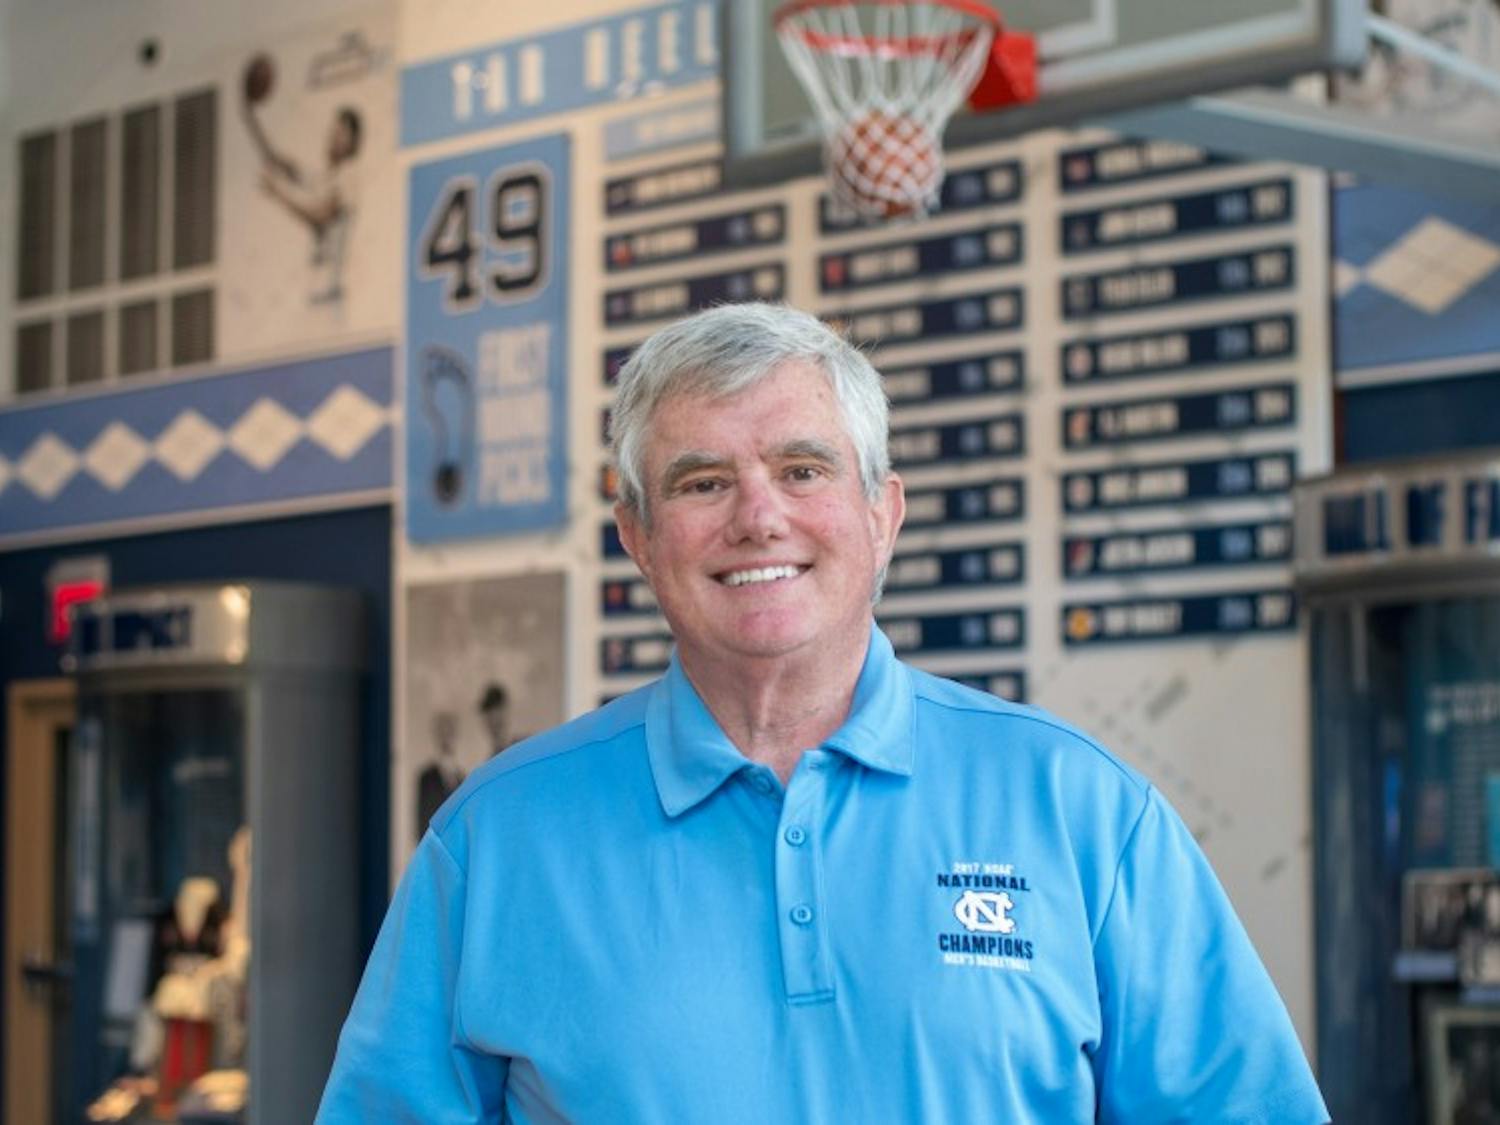 Bob Ward stands inside the Carolina Basketball Museum where he has worked as an attendant and greeter since 2008. Ward is a lifelong resident of Chapel Hill and has been a regular usher at UNC basketball games for 35 years.